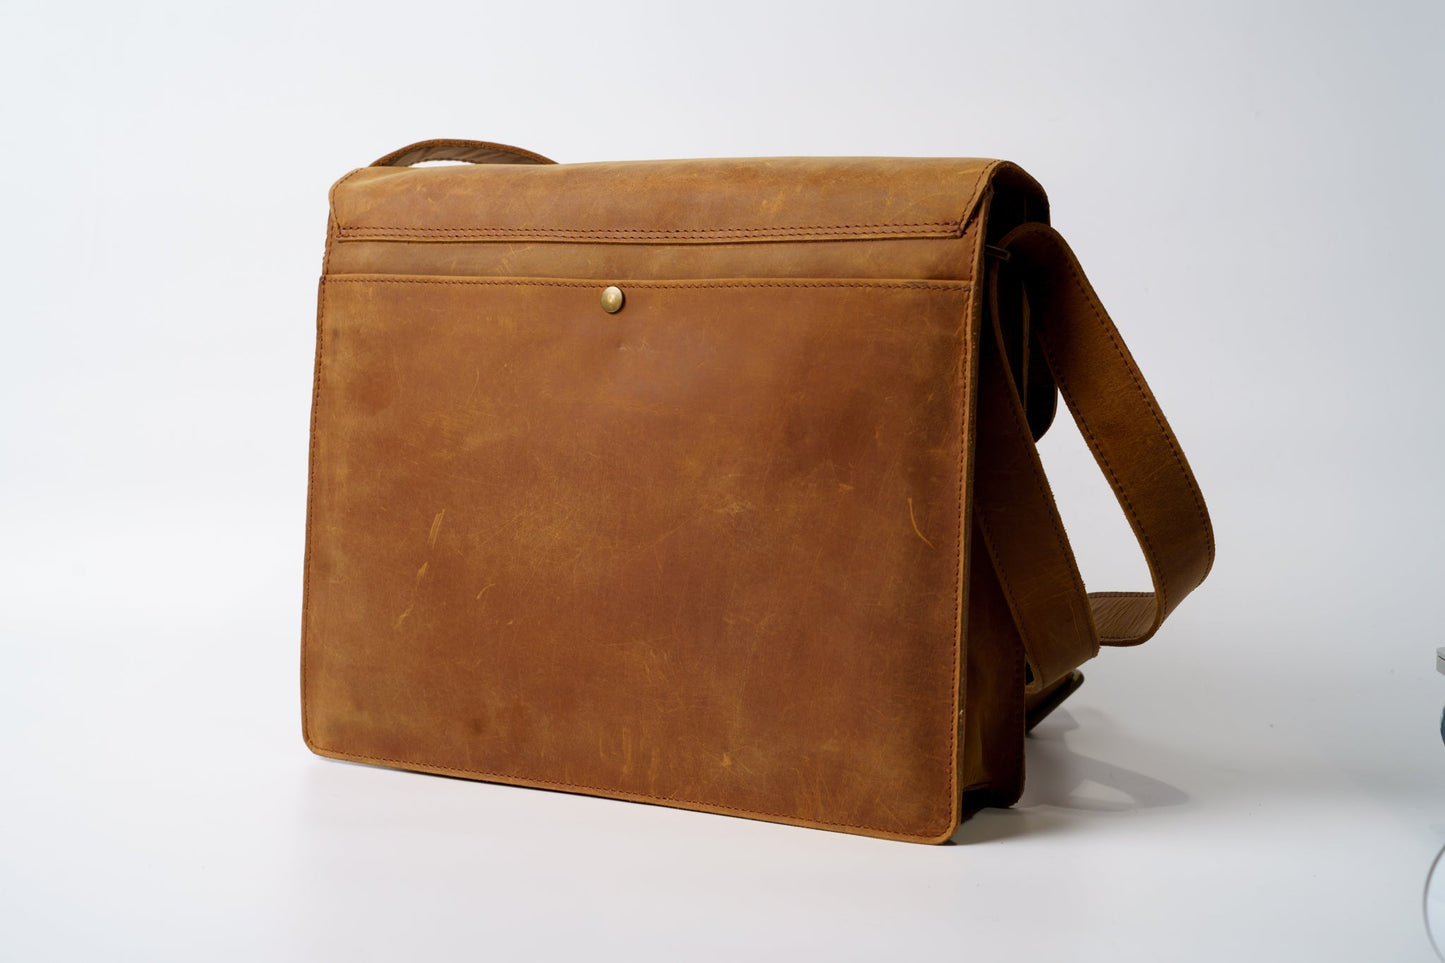 Satchel Laptop Bag Brown Leather with Strap Closure